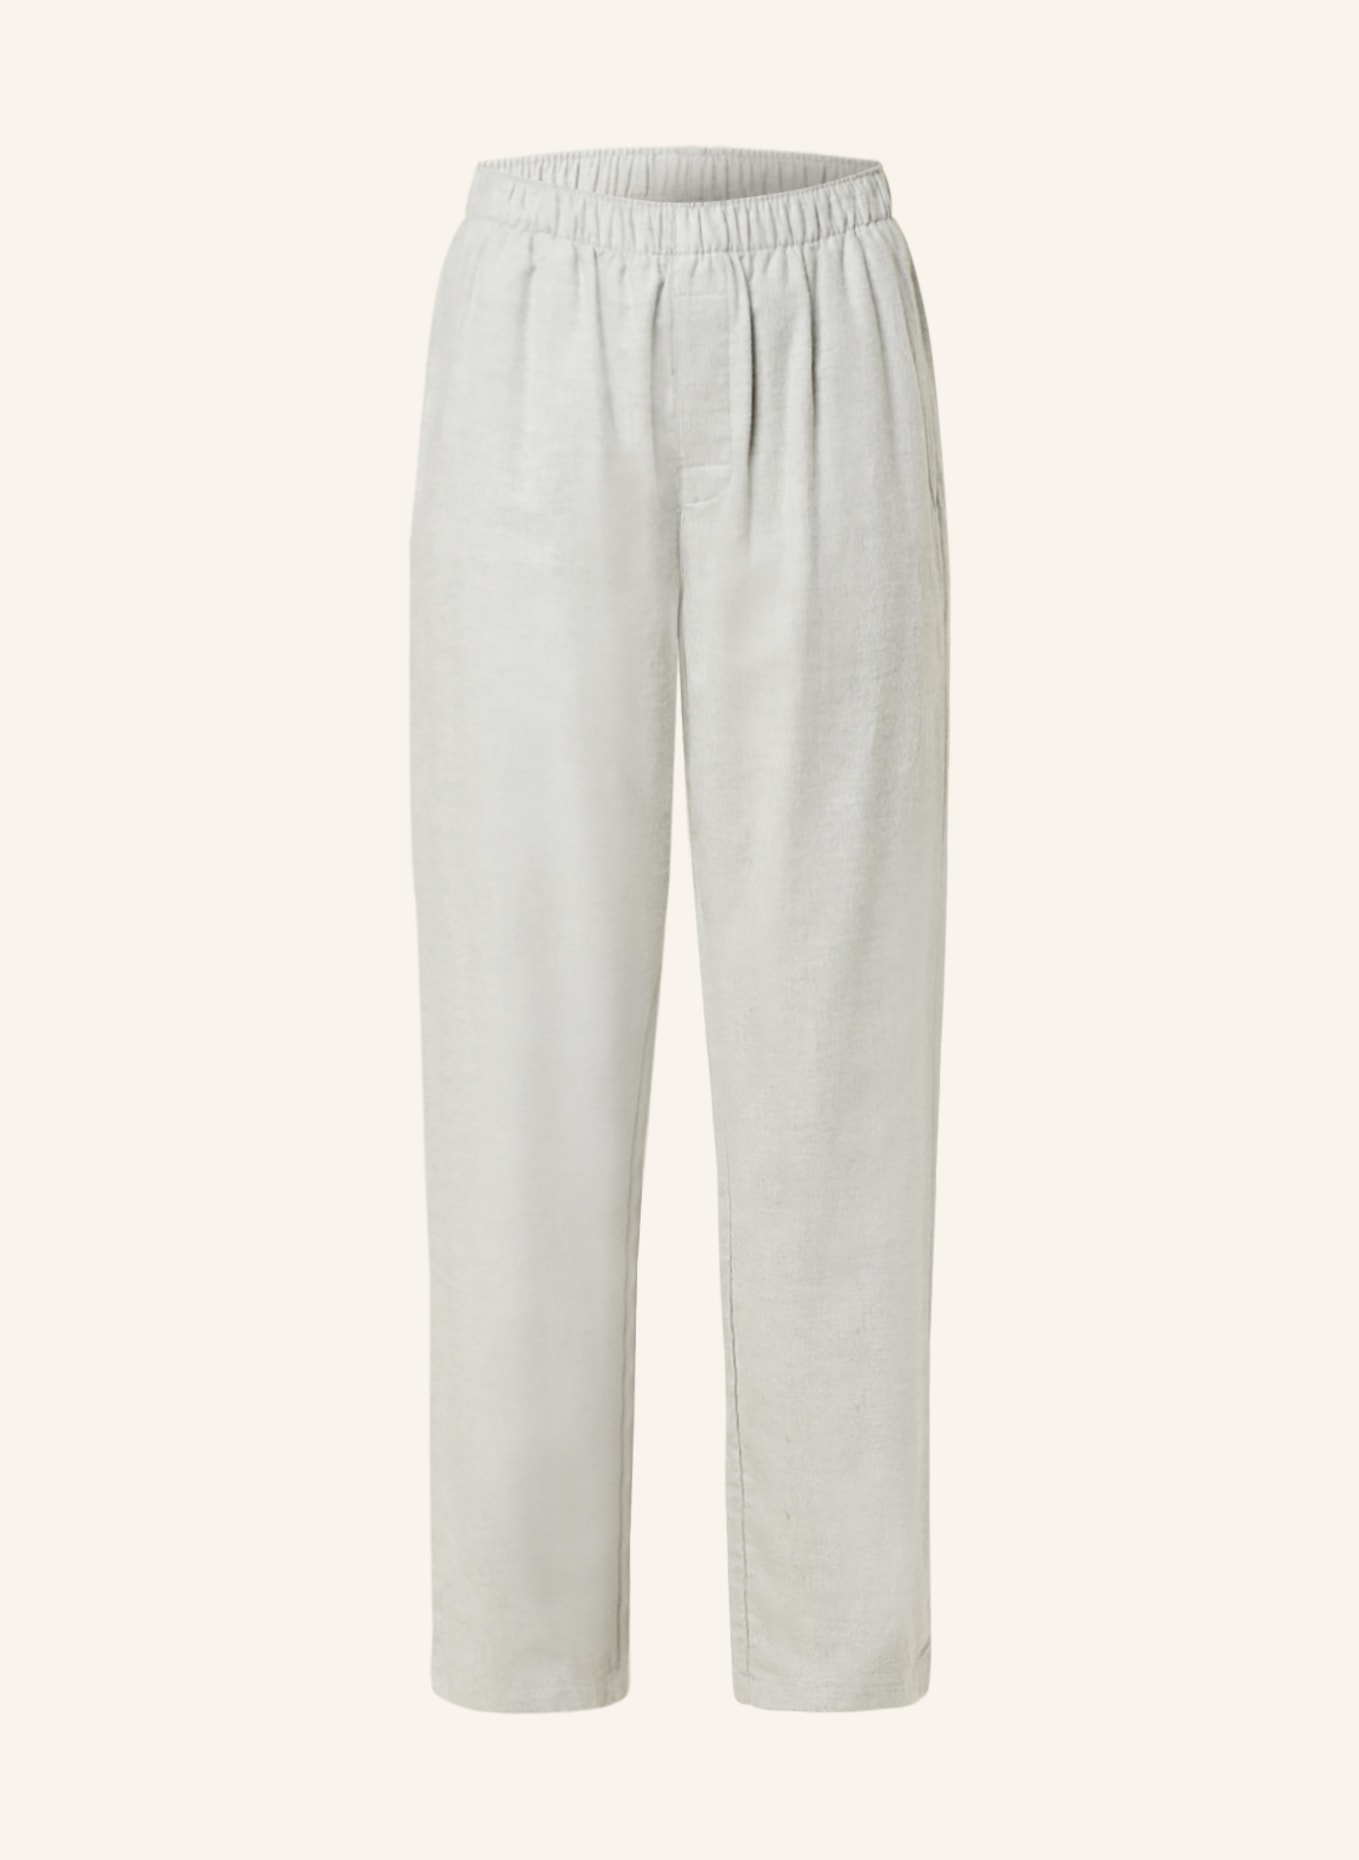 Calvin Klein Pajama pants PURE FLANELL in flannel, Color: GRAY (Image 1)